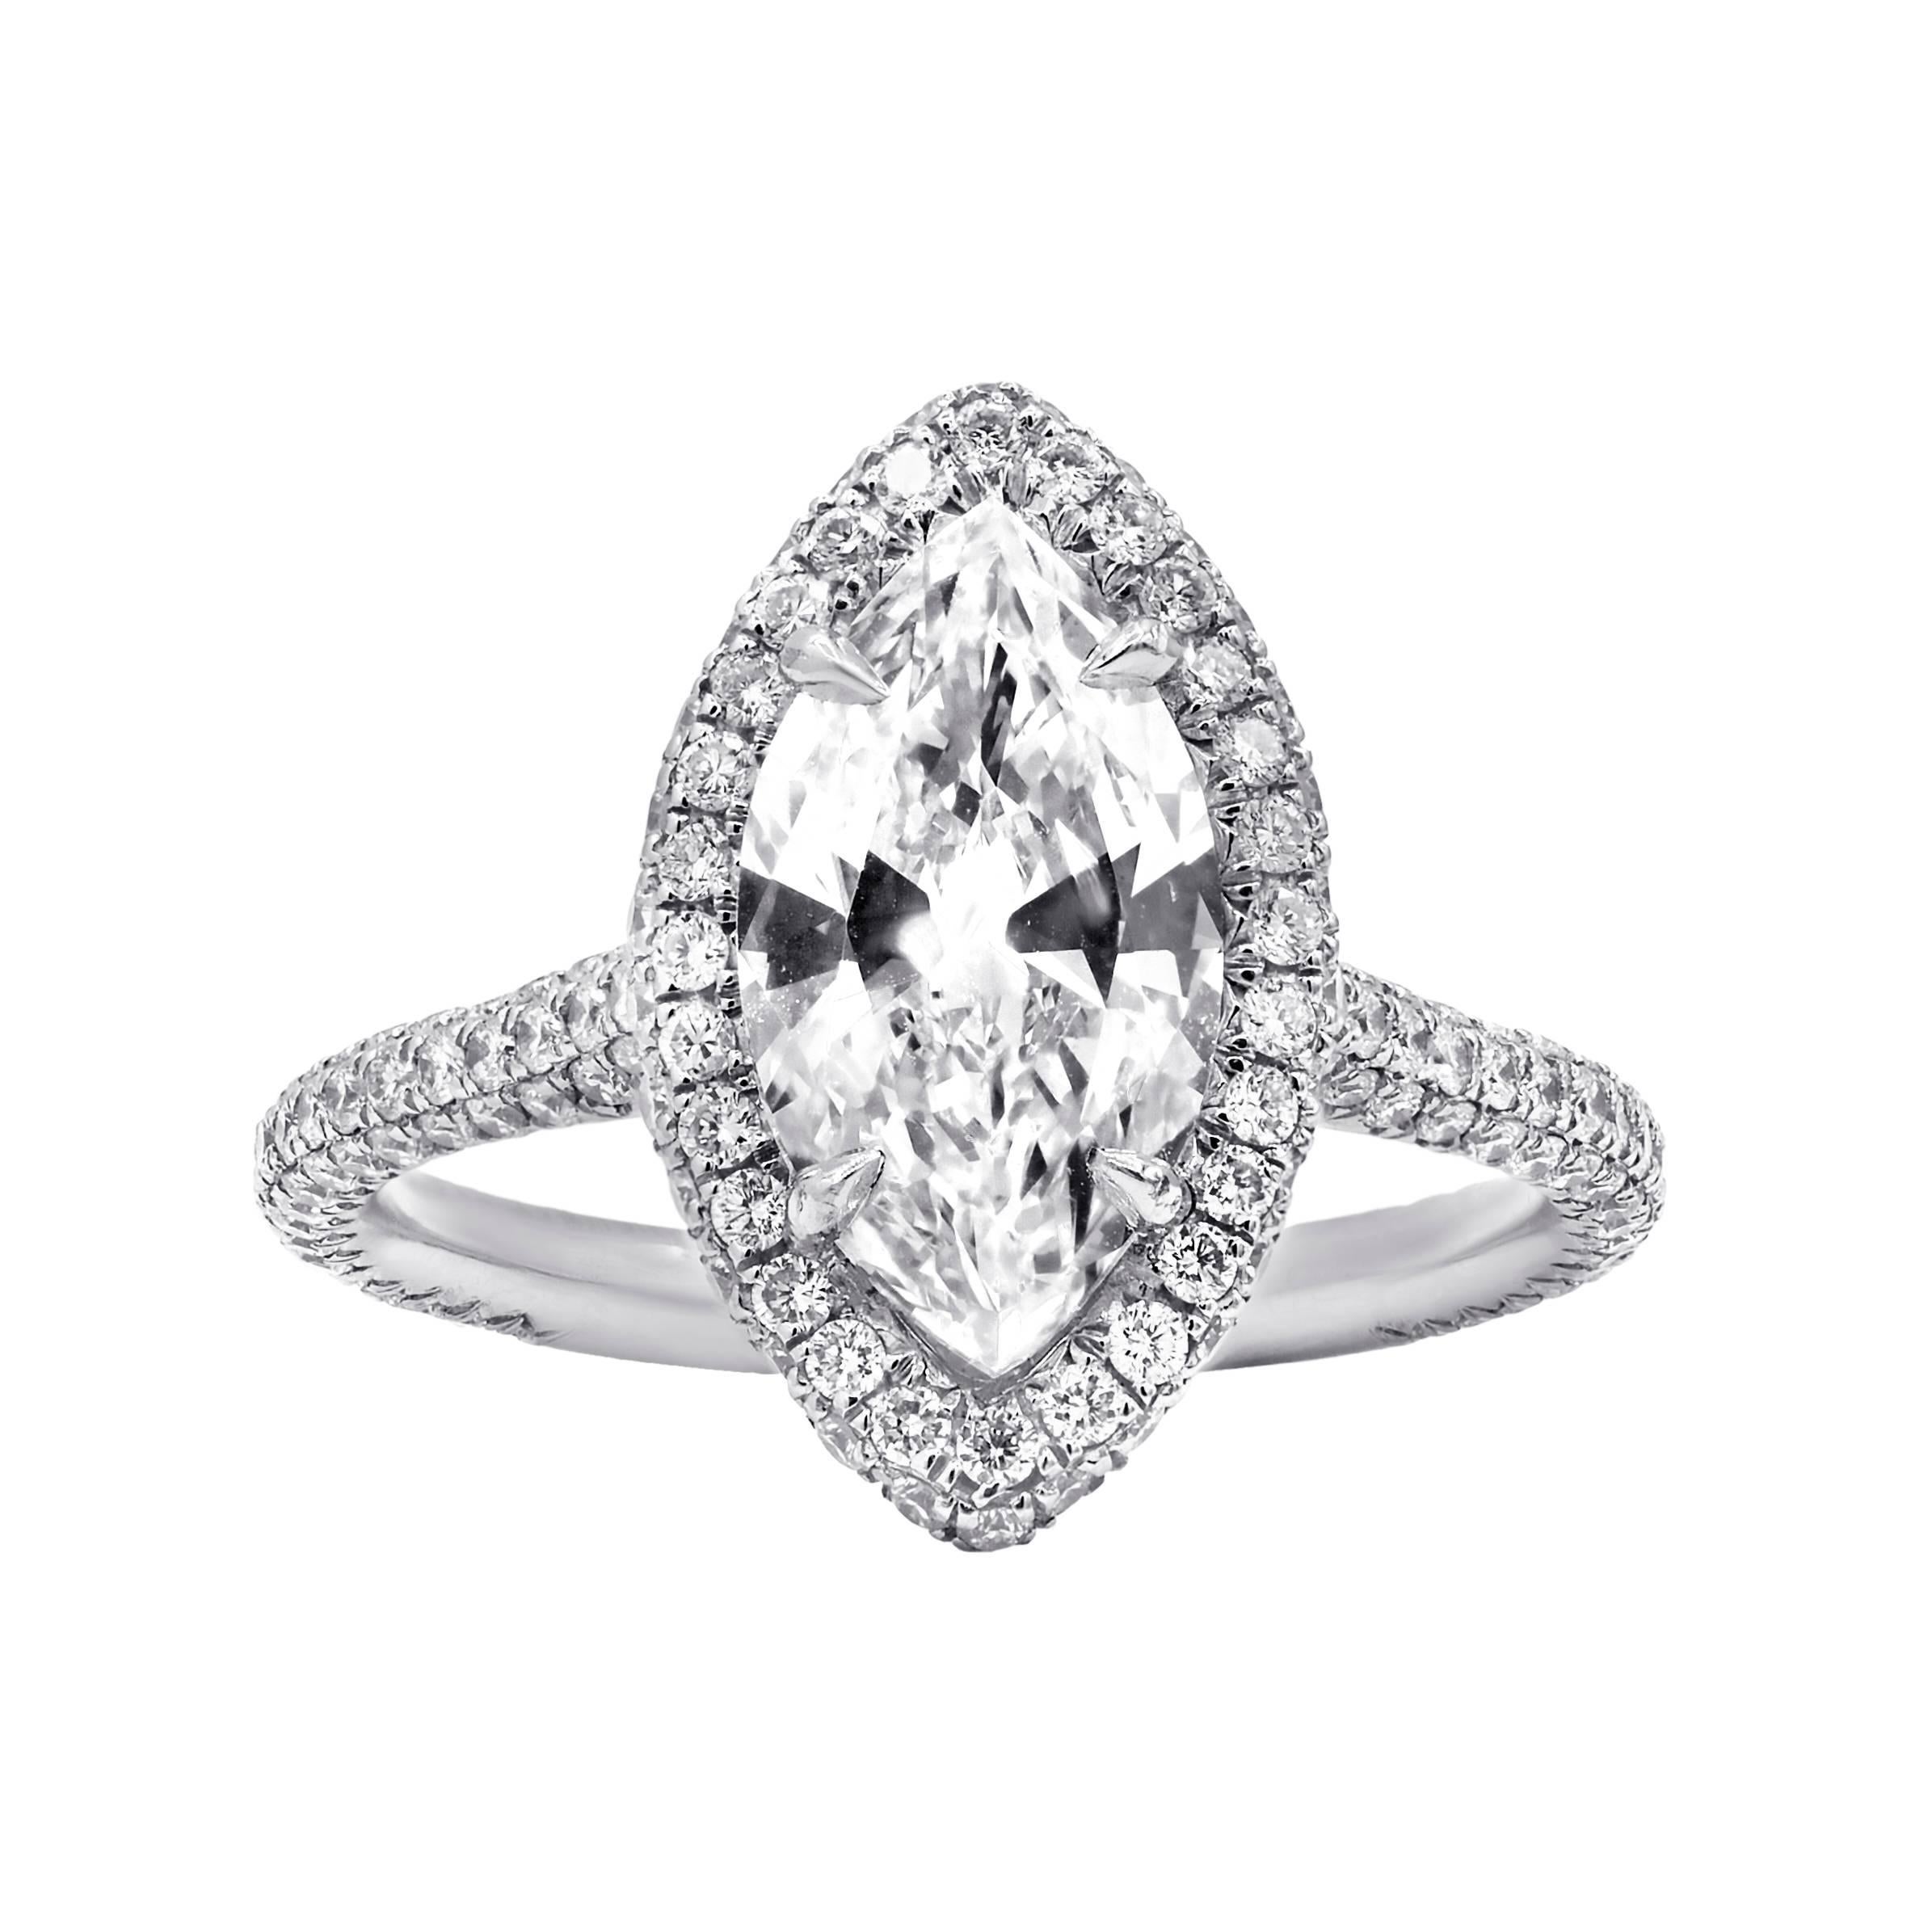 Diana M. Custom 3.26 cts Engagement  Marquise Cut Diamond Ring For Sale